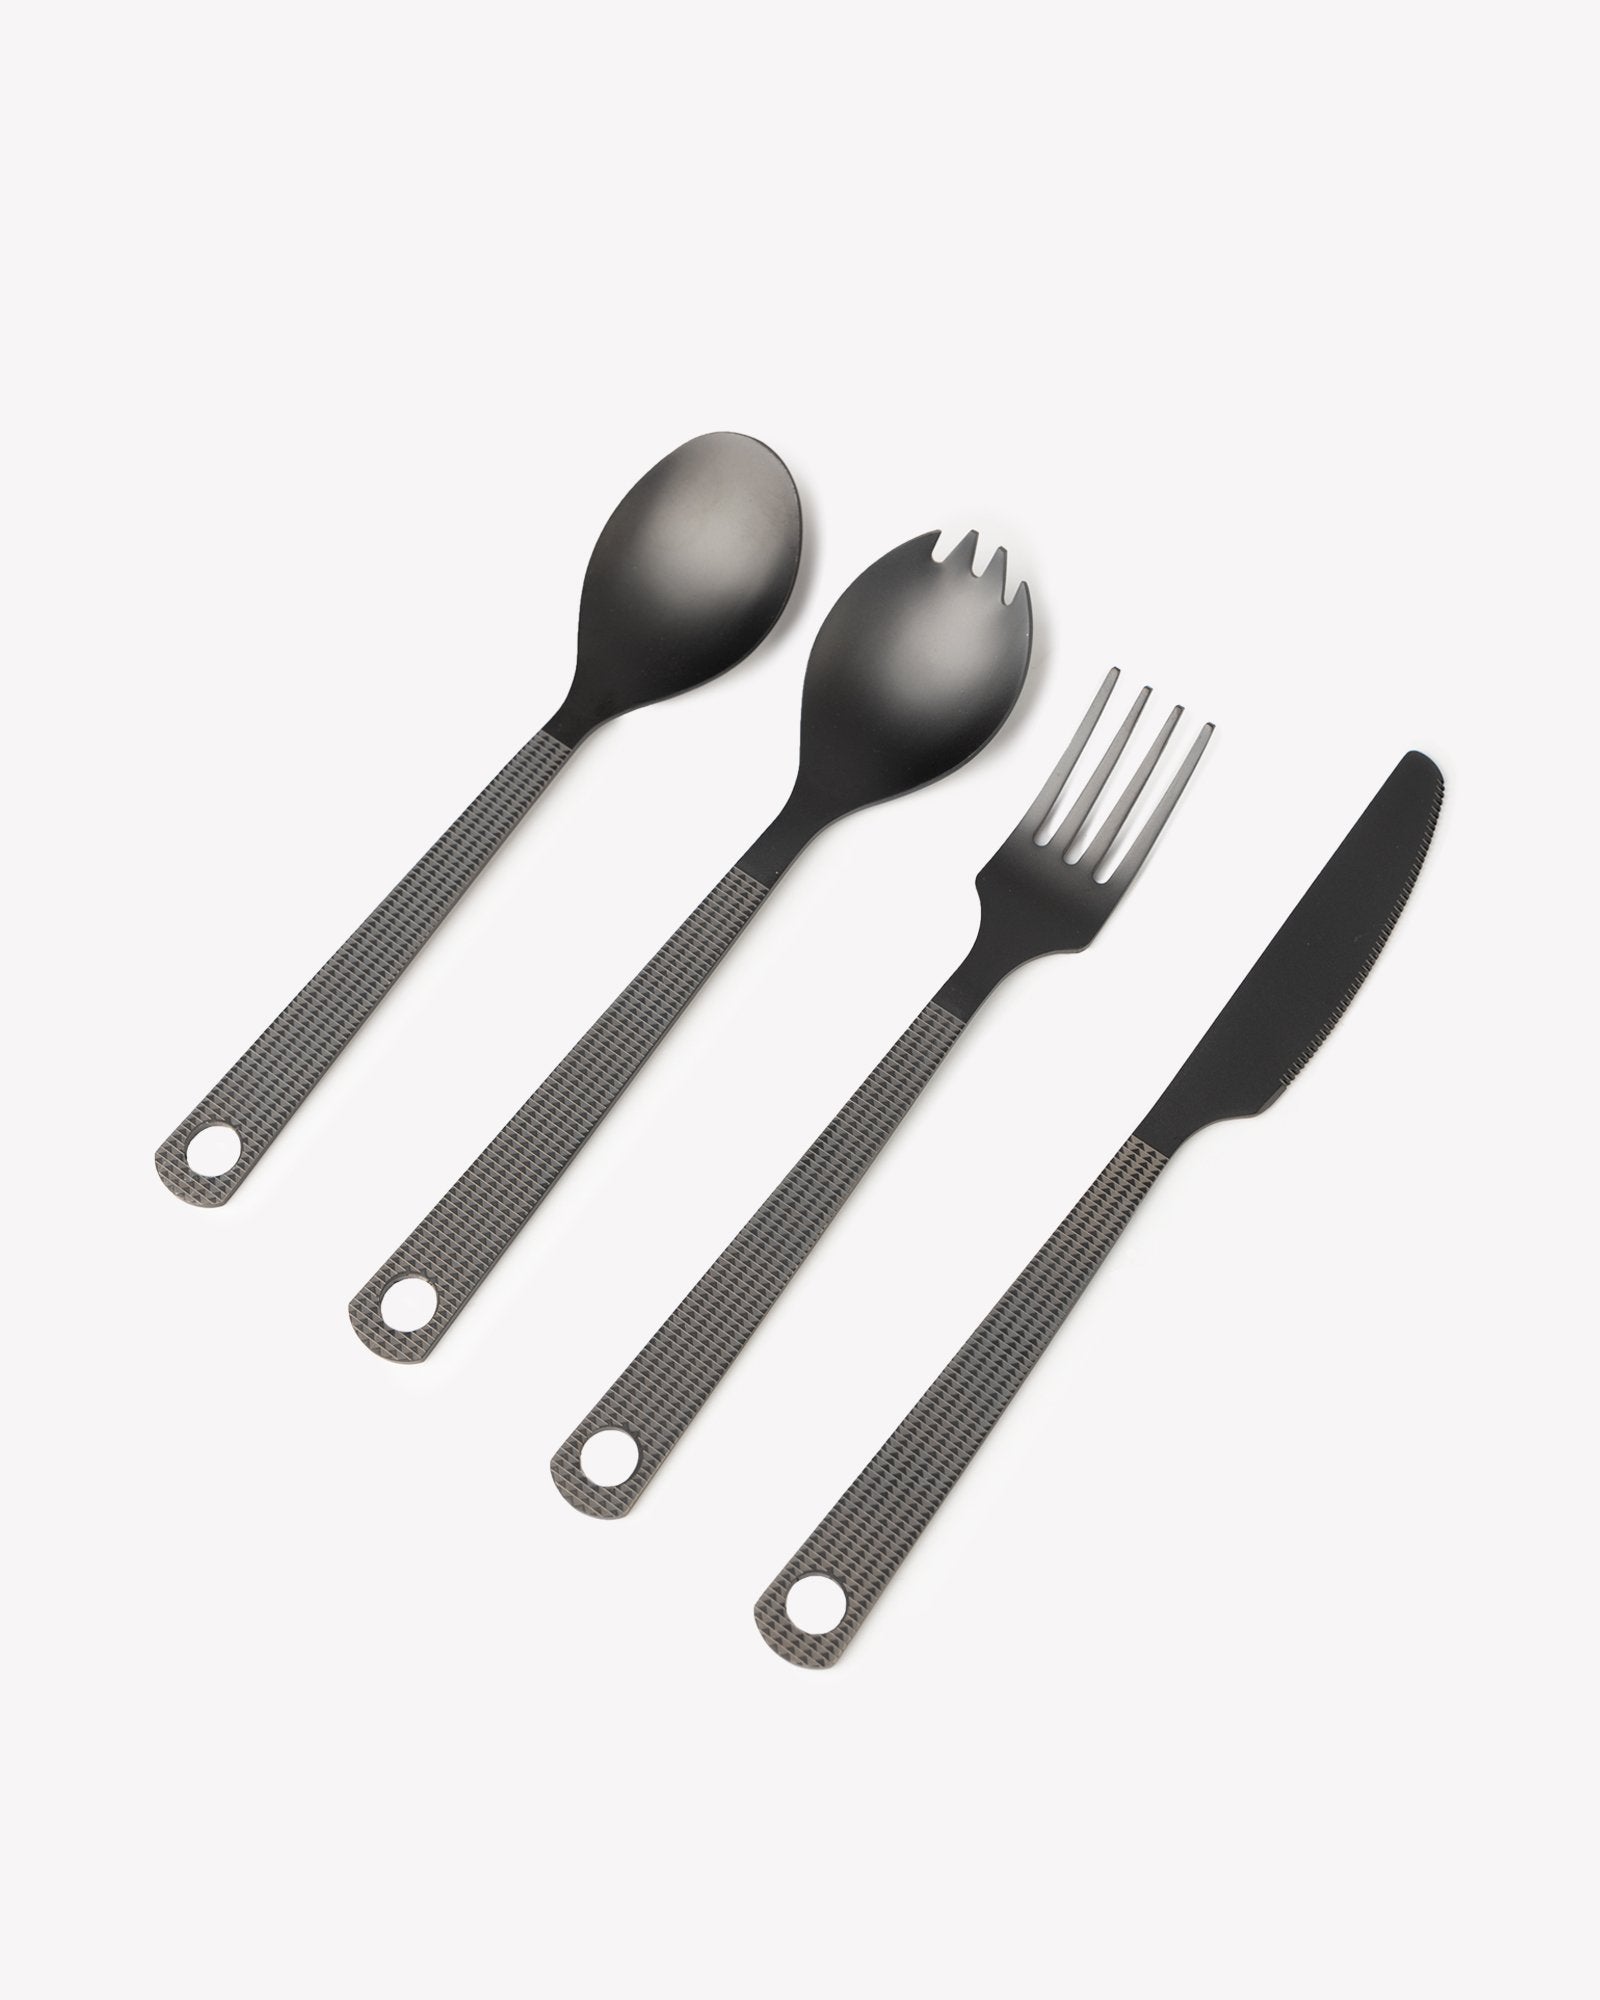 Thyme & Table essential collection 20 piece cutlery set